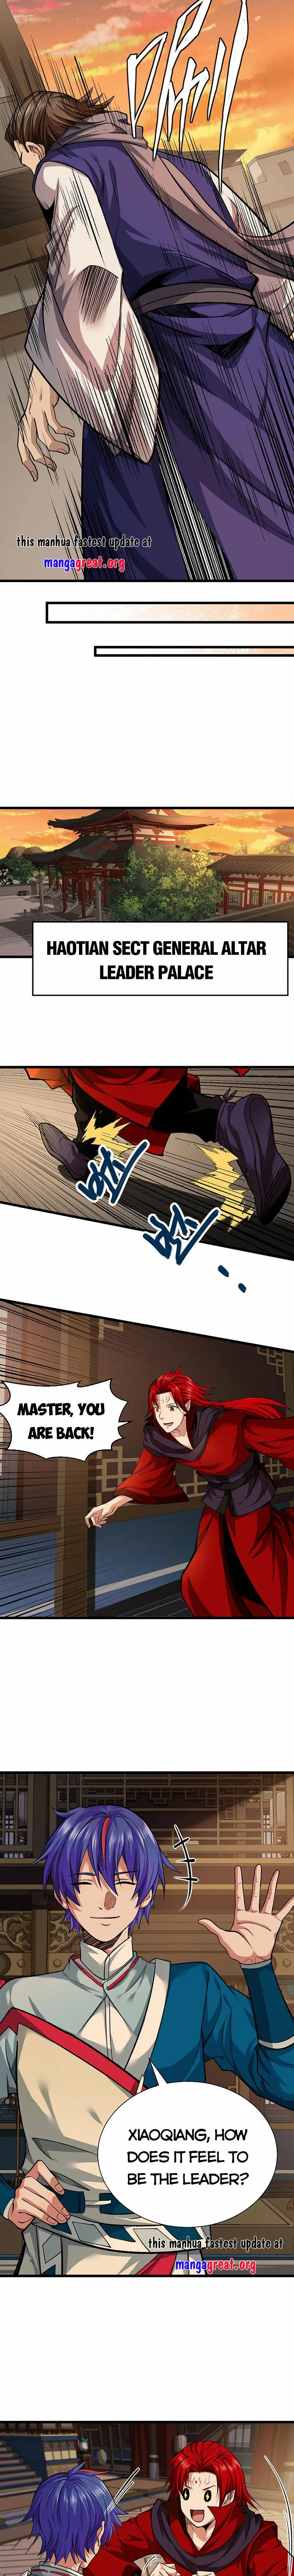 Martial Arts Reigns - Page 2